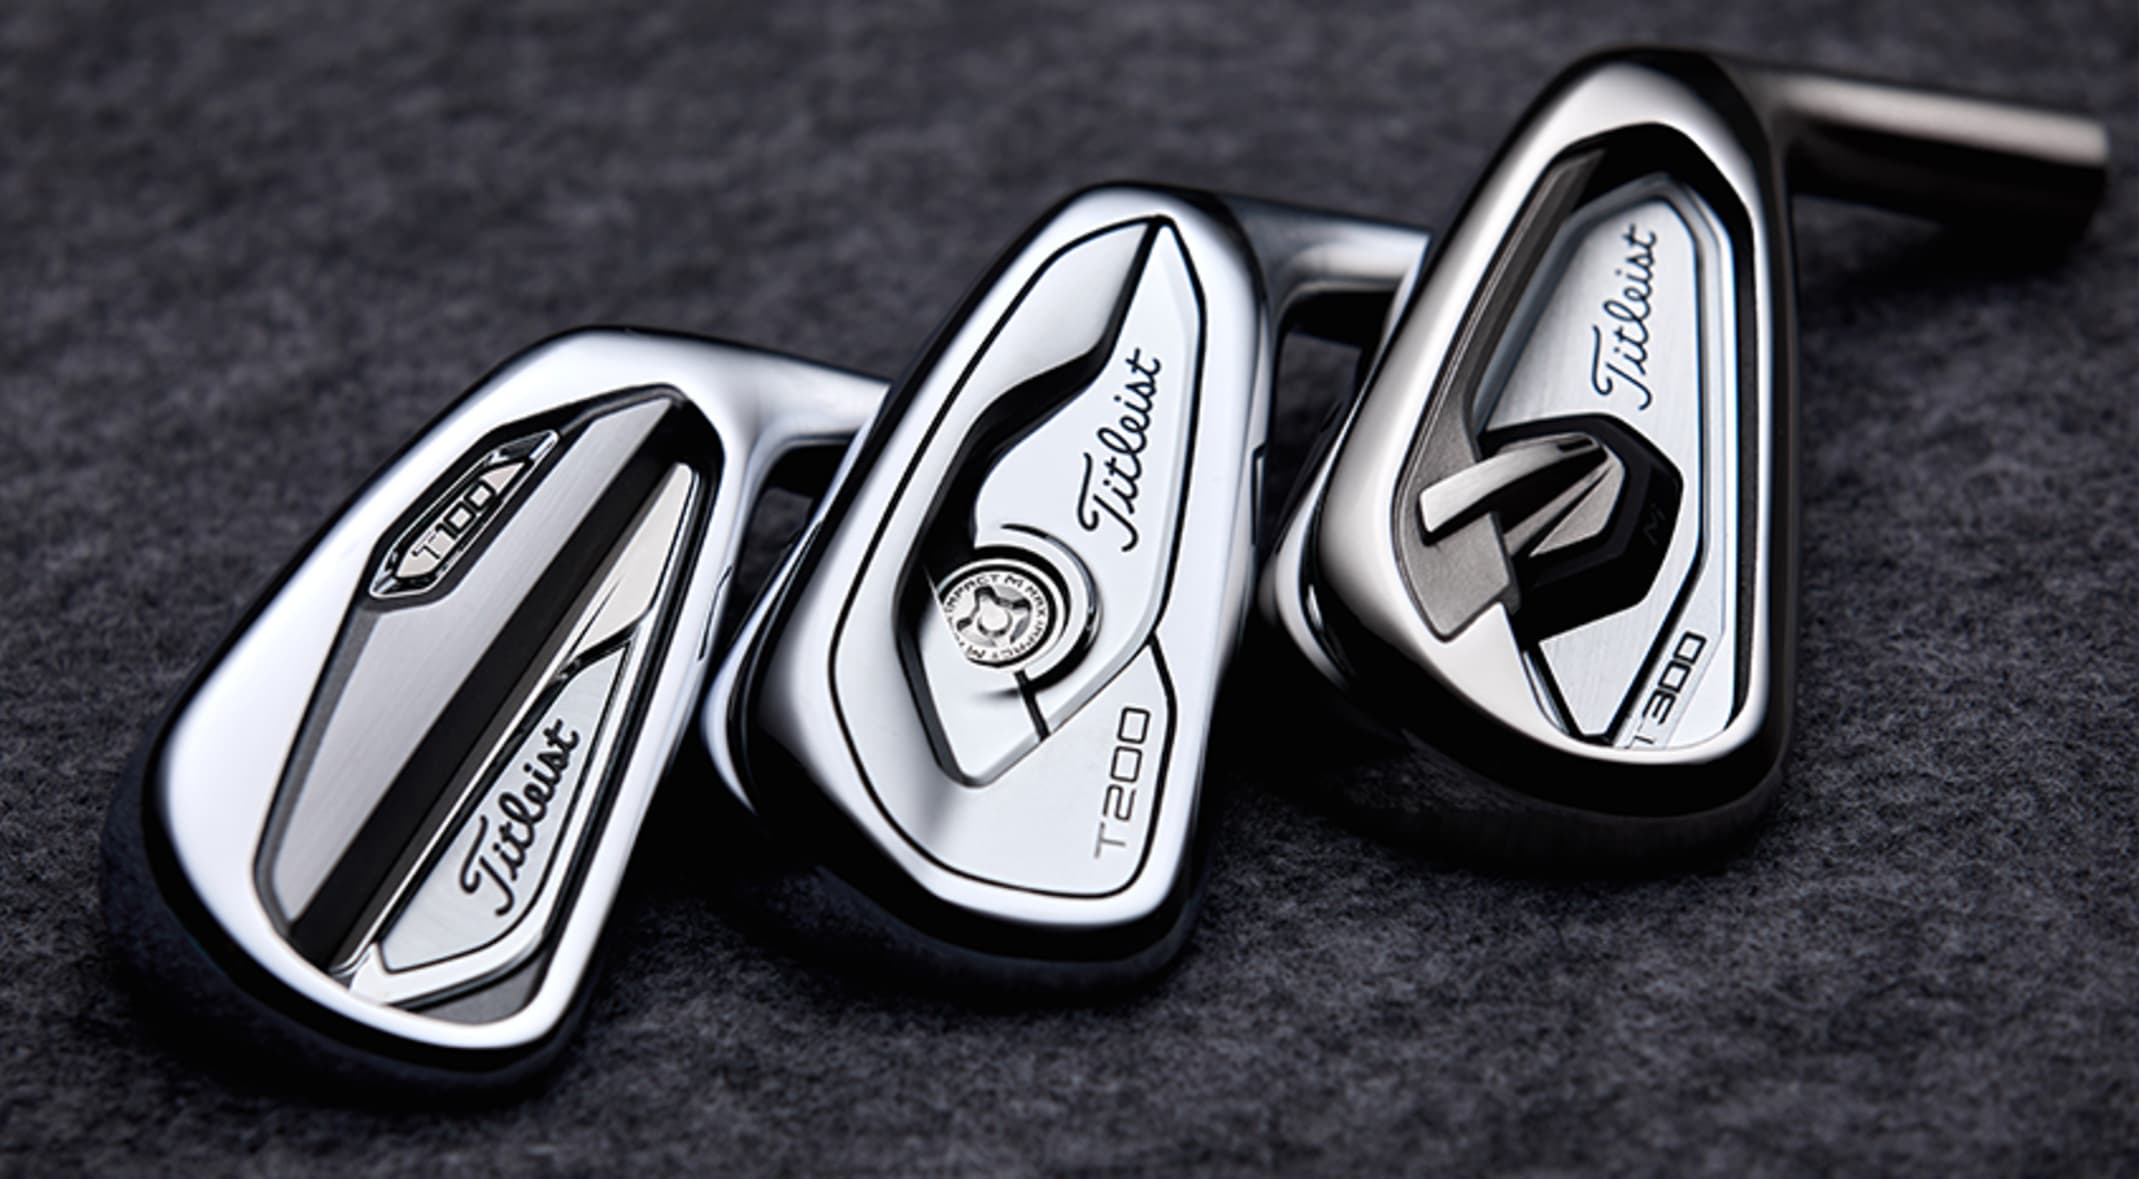 Everything you need to know about Titleist's new T100, T200, T300, 620 MB and 620 CB irons